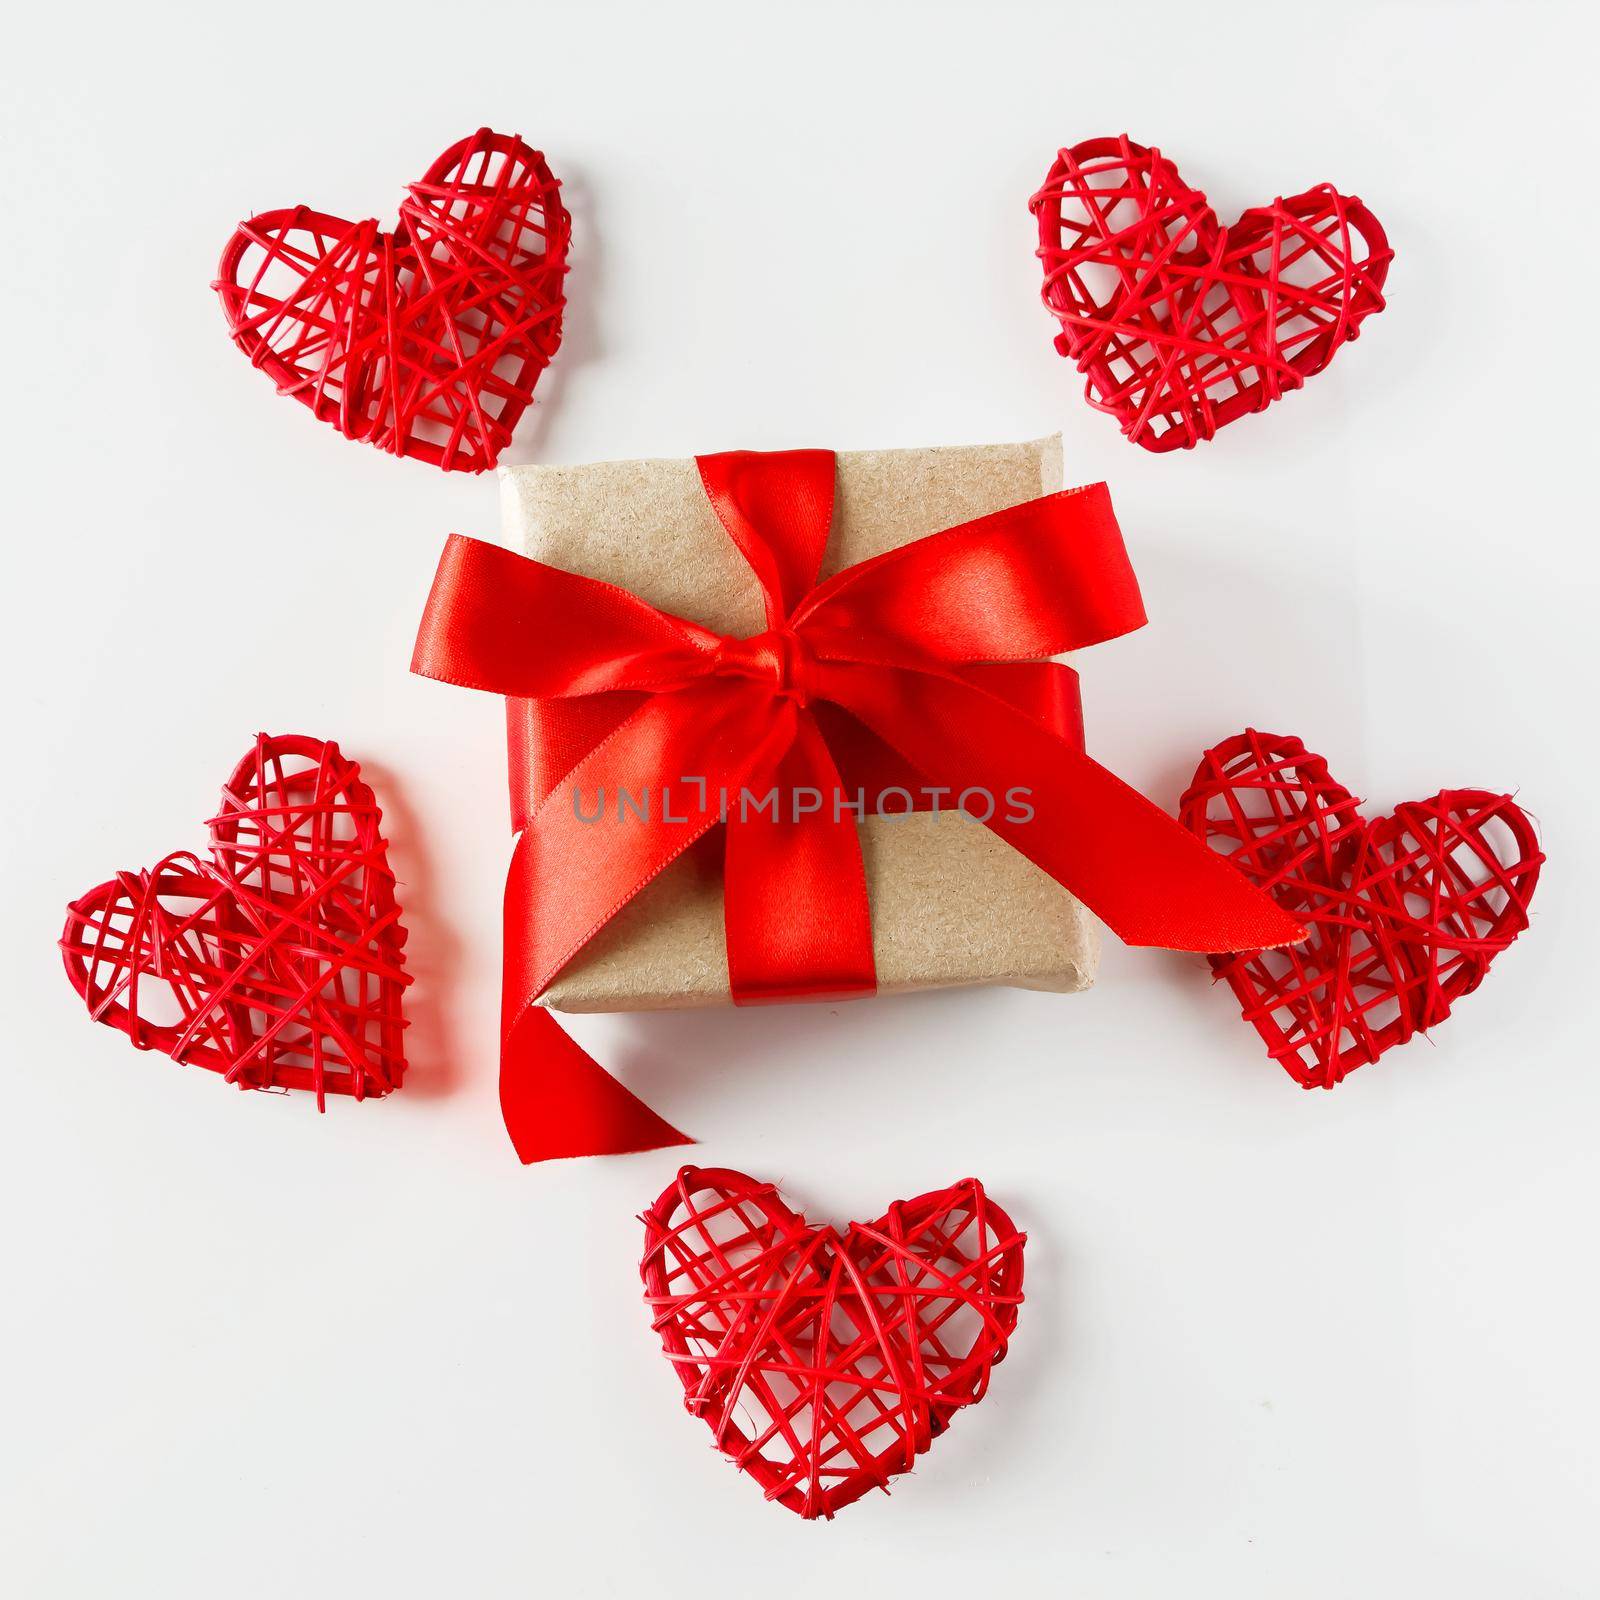 Valentine's day gift and red hearts on a white background. Gift in craft paper with a red ribbon surrounded by hearts for Valentine's Day